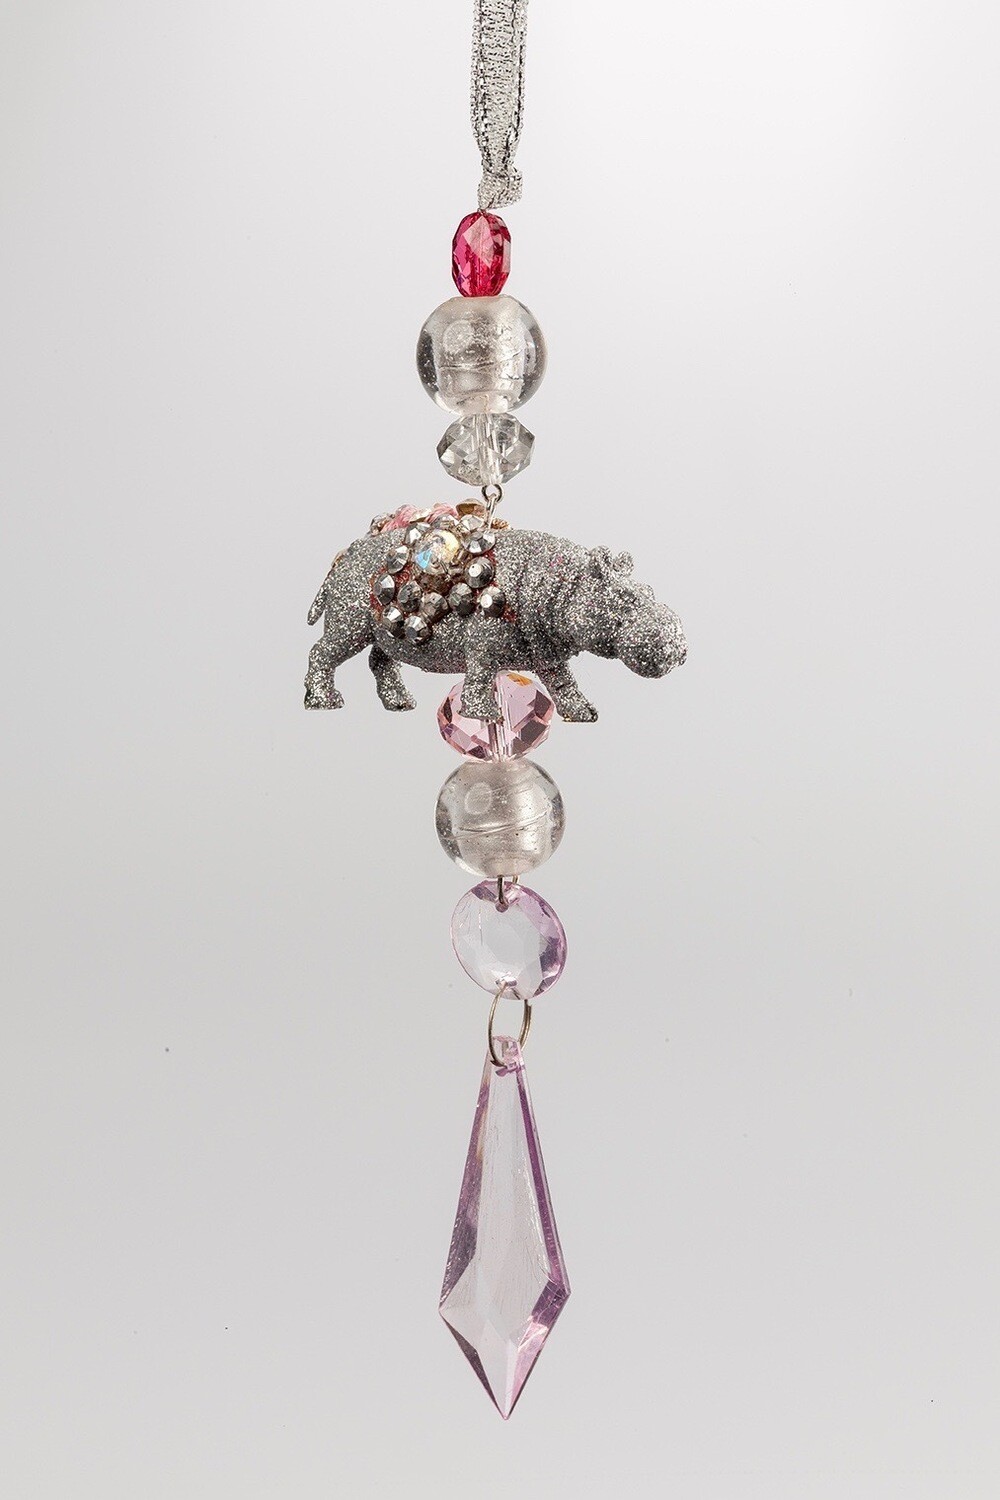 Hanging Decoration -Glitter Silver Hippo with Pale Pink Drop Beads